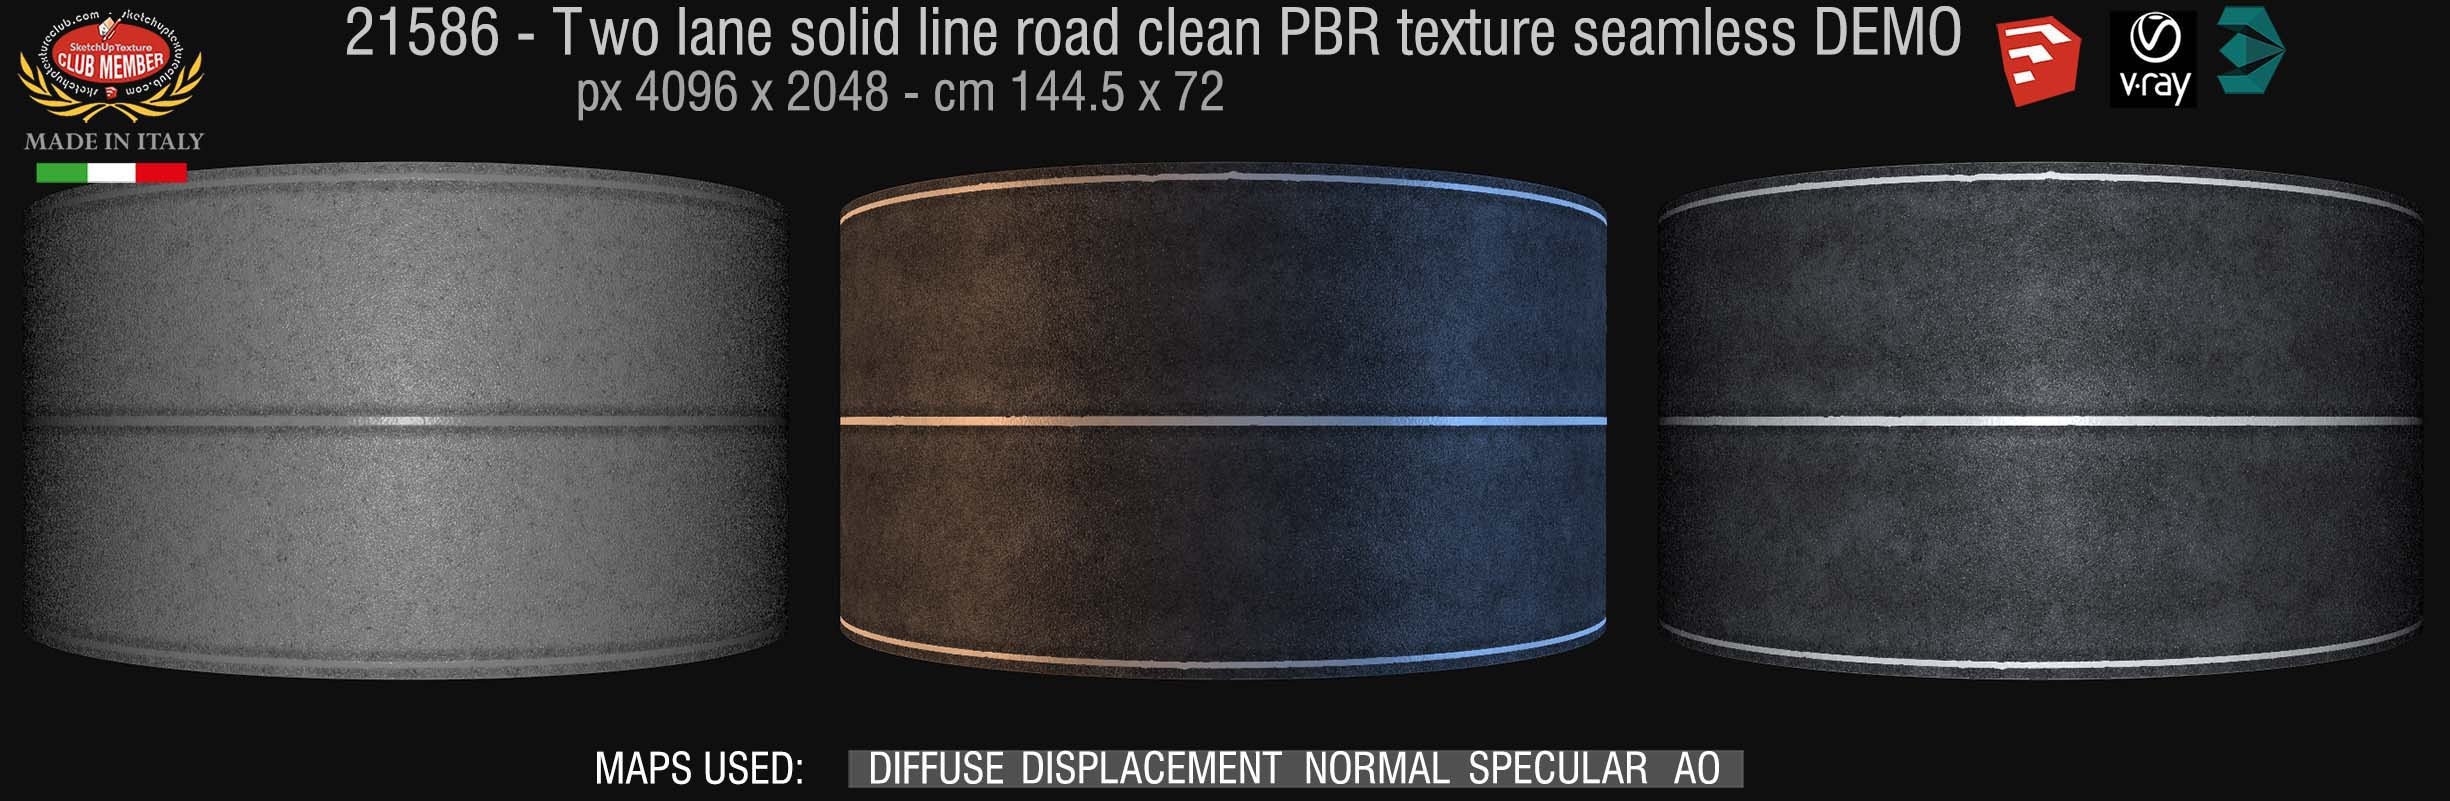 21586 two lane solid line road clean PBR texture seamless DEMO